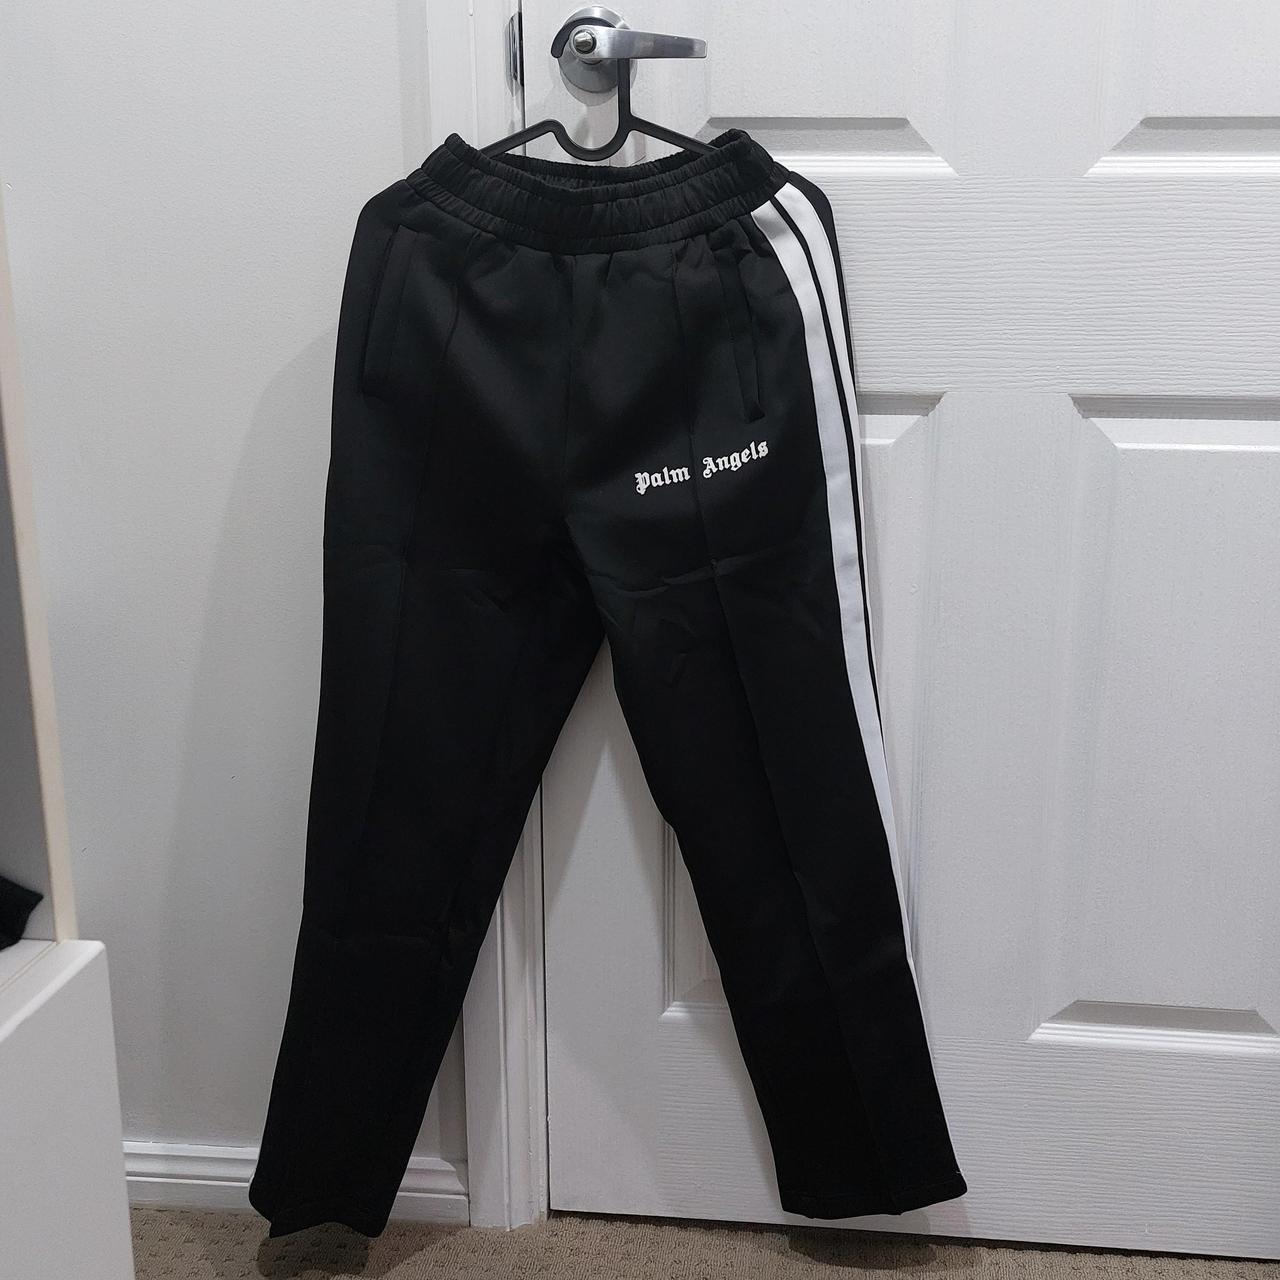 Palm angles sweatpants brand new condition very... - Depop